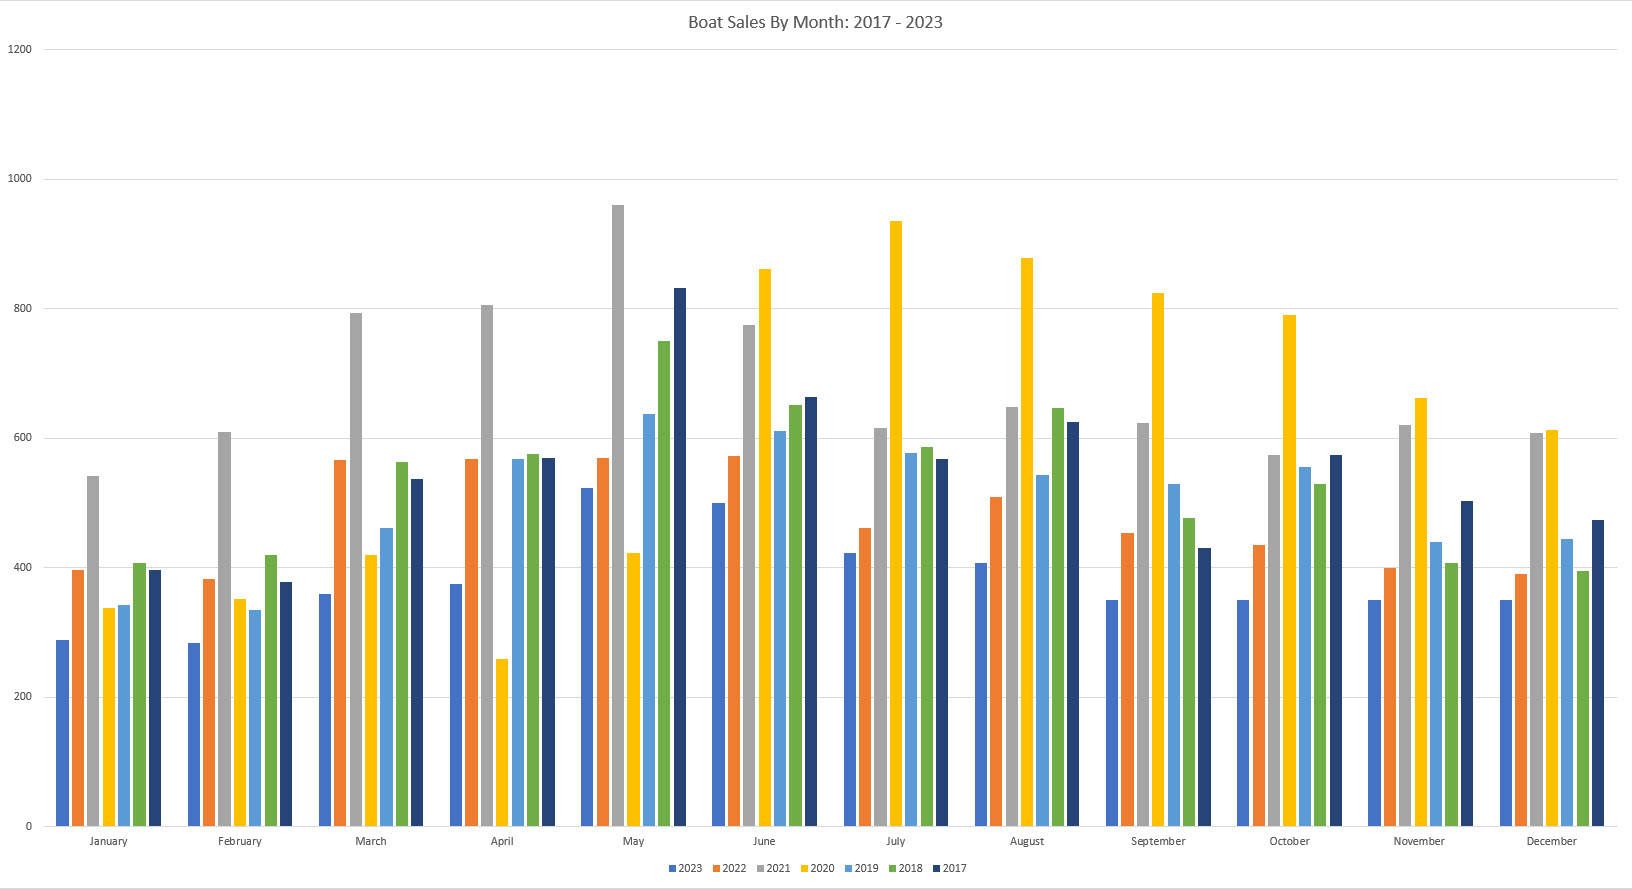 graph showing boat sales by month and year